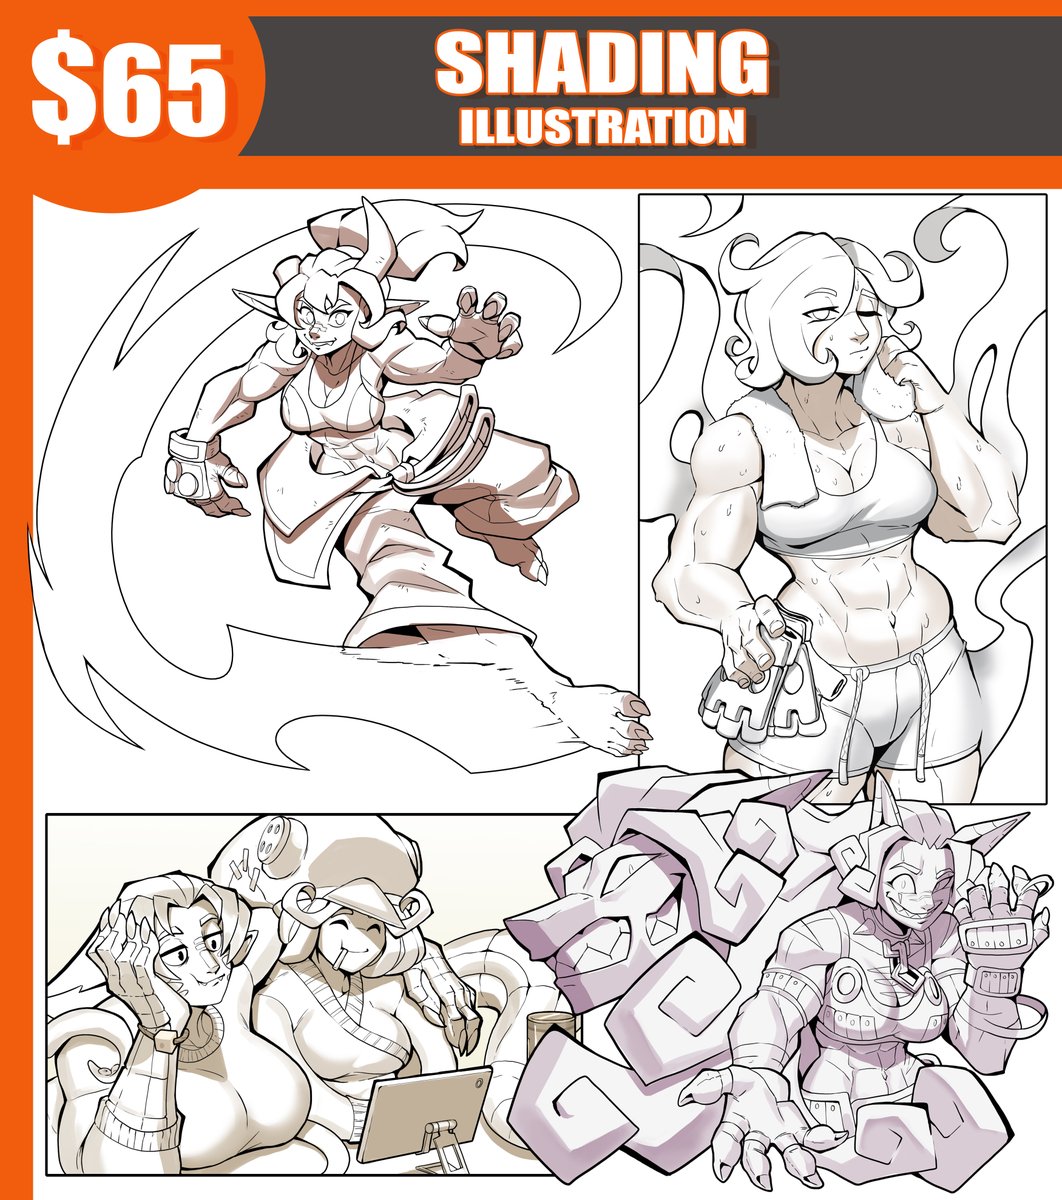 ⭐️COMMISSIONS ARE OPEN⭐️
- I only do payments through PayPal
- DM or email me at: chrisdrakearts@gmail.com If interested
- Include information/references of what you want me to draw in DM or email 